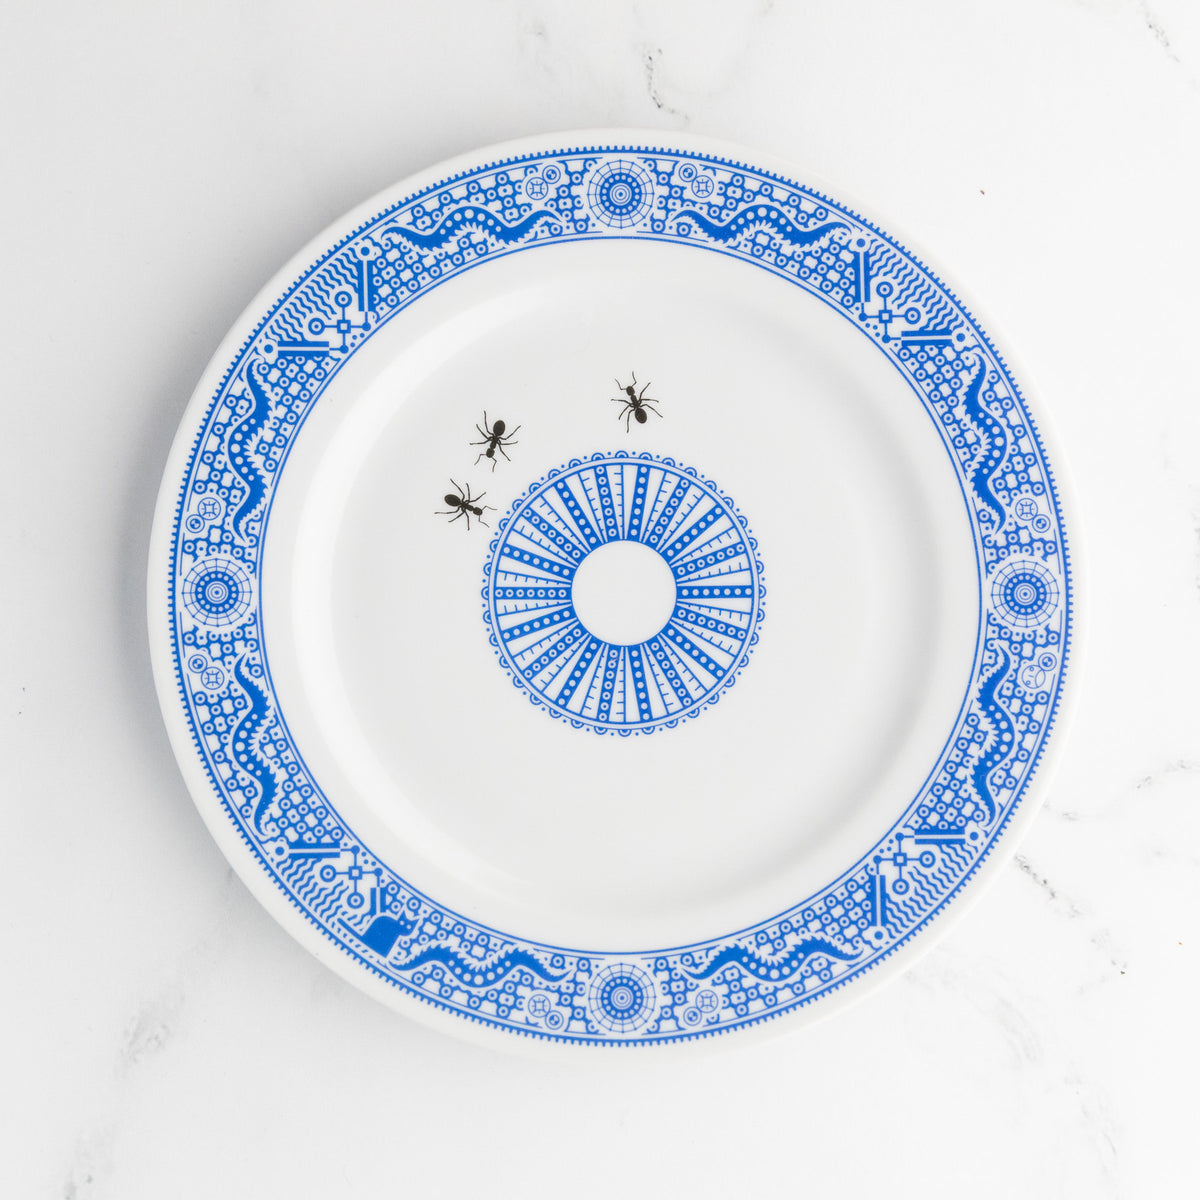 Ants Small Plates (Set of 4)